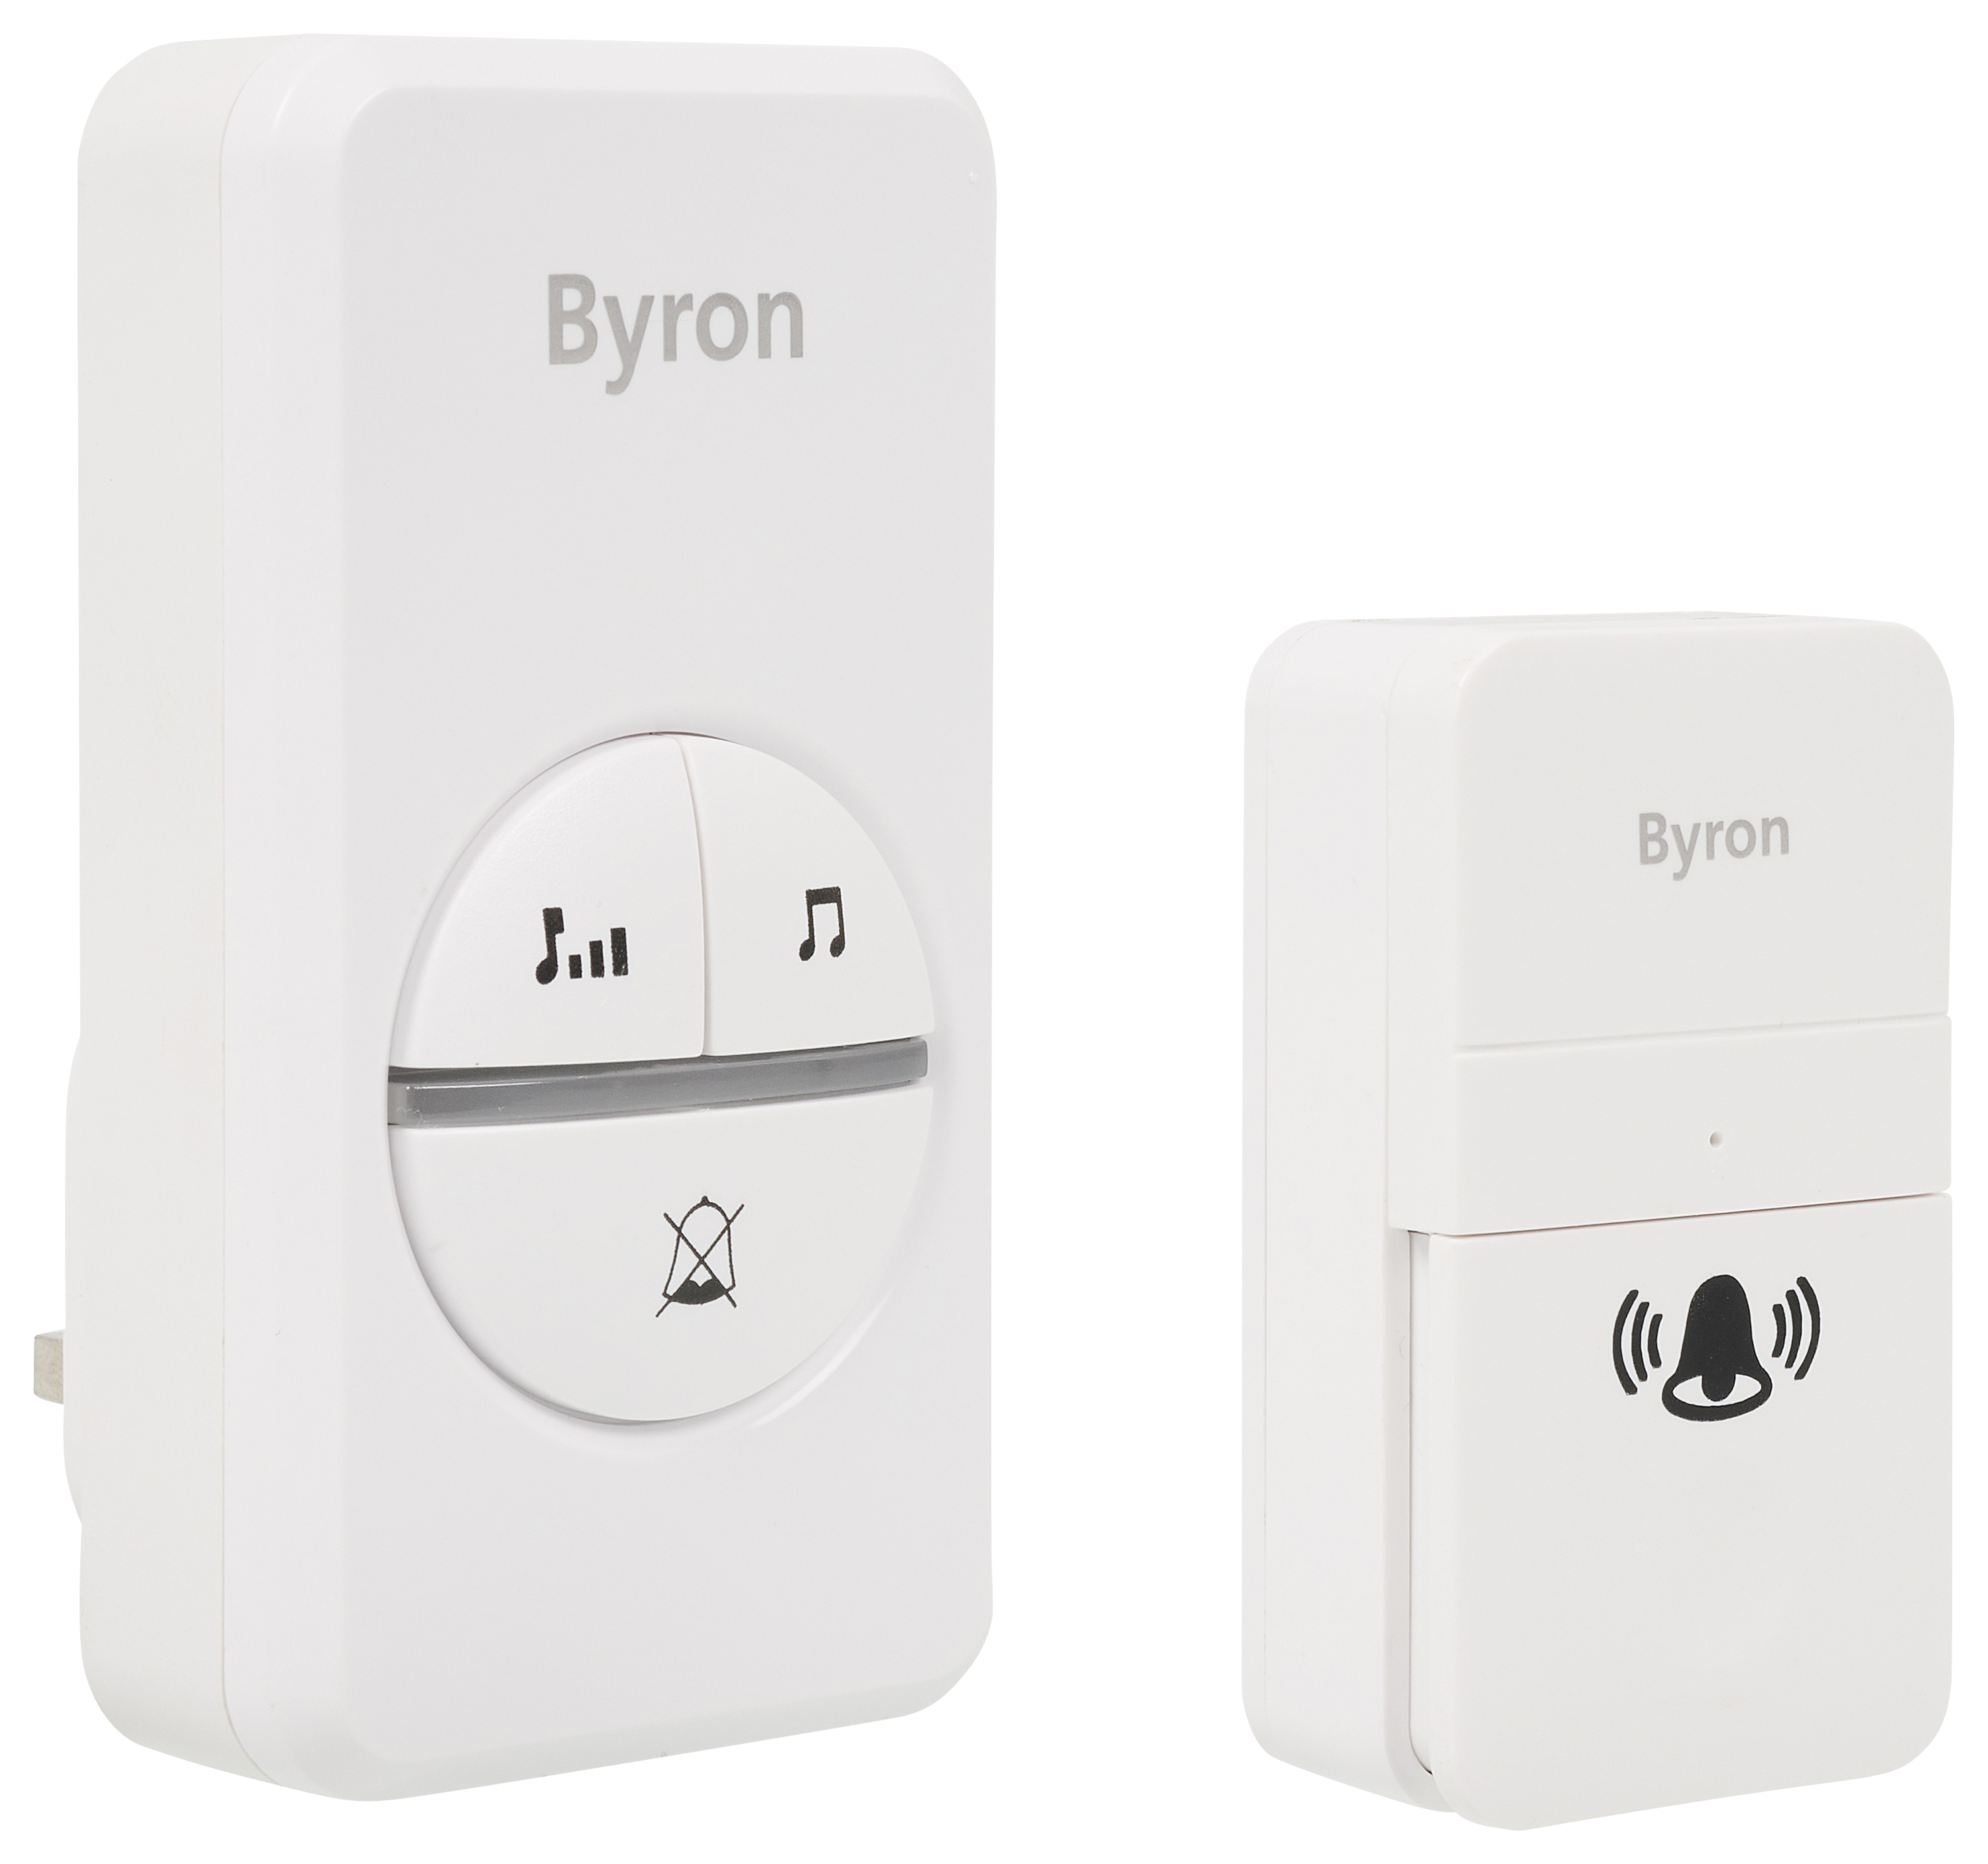 Image of Byron Kinetic Doorbell With Chime - White